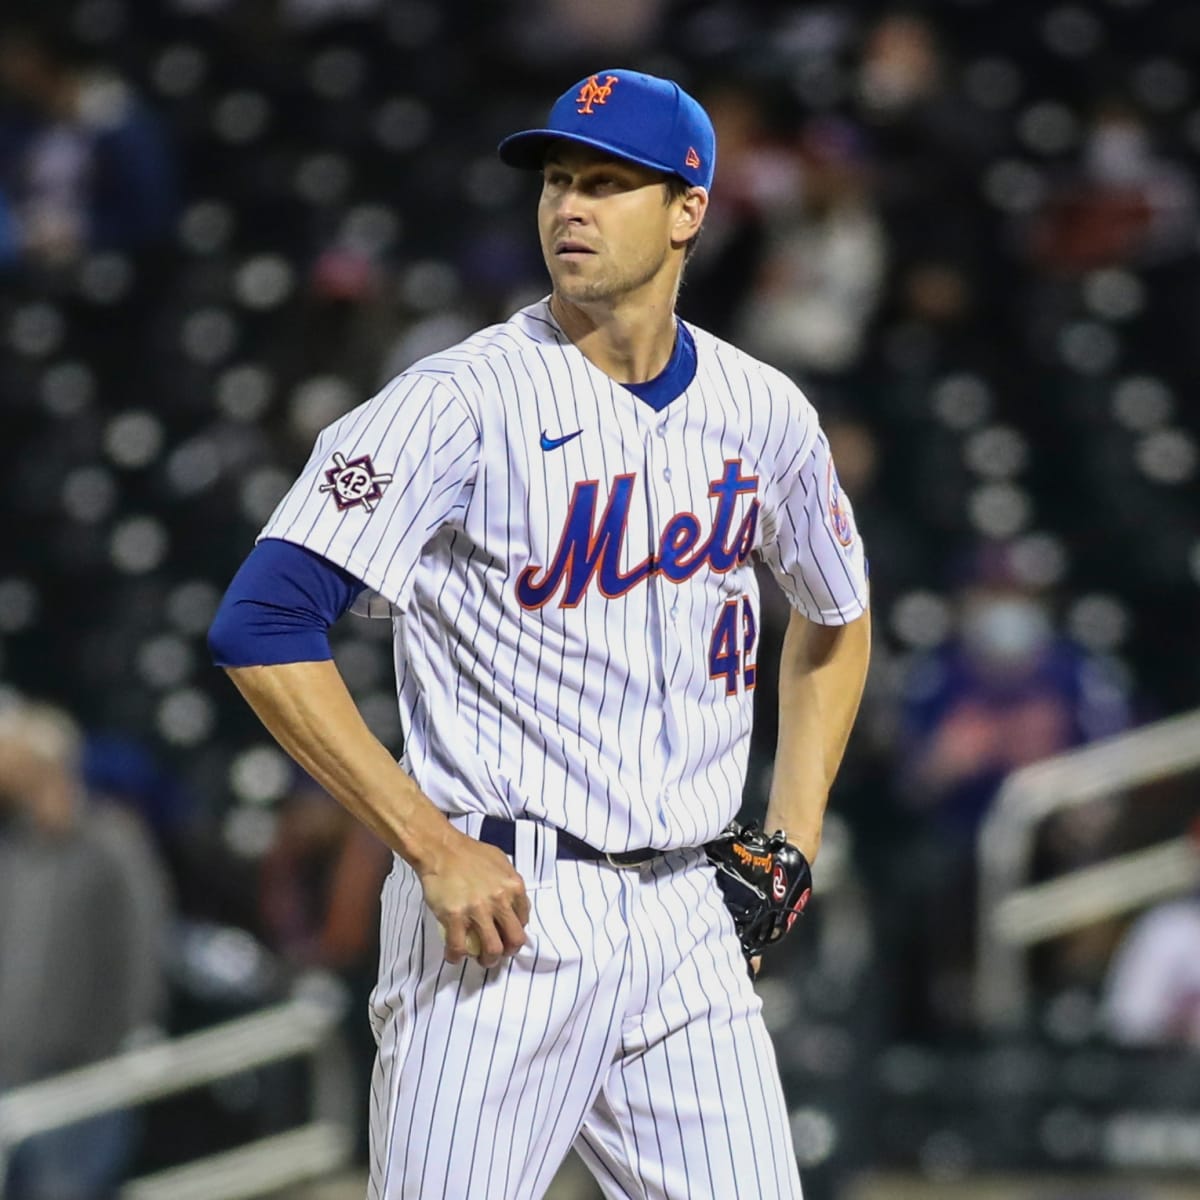 MLB - 15 strikeouts! 😳 Jacob deGrom has set a new career